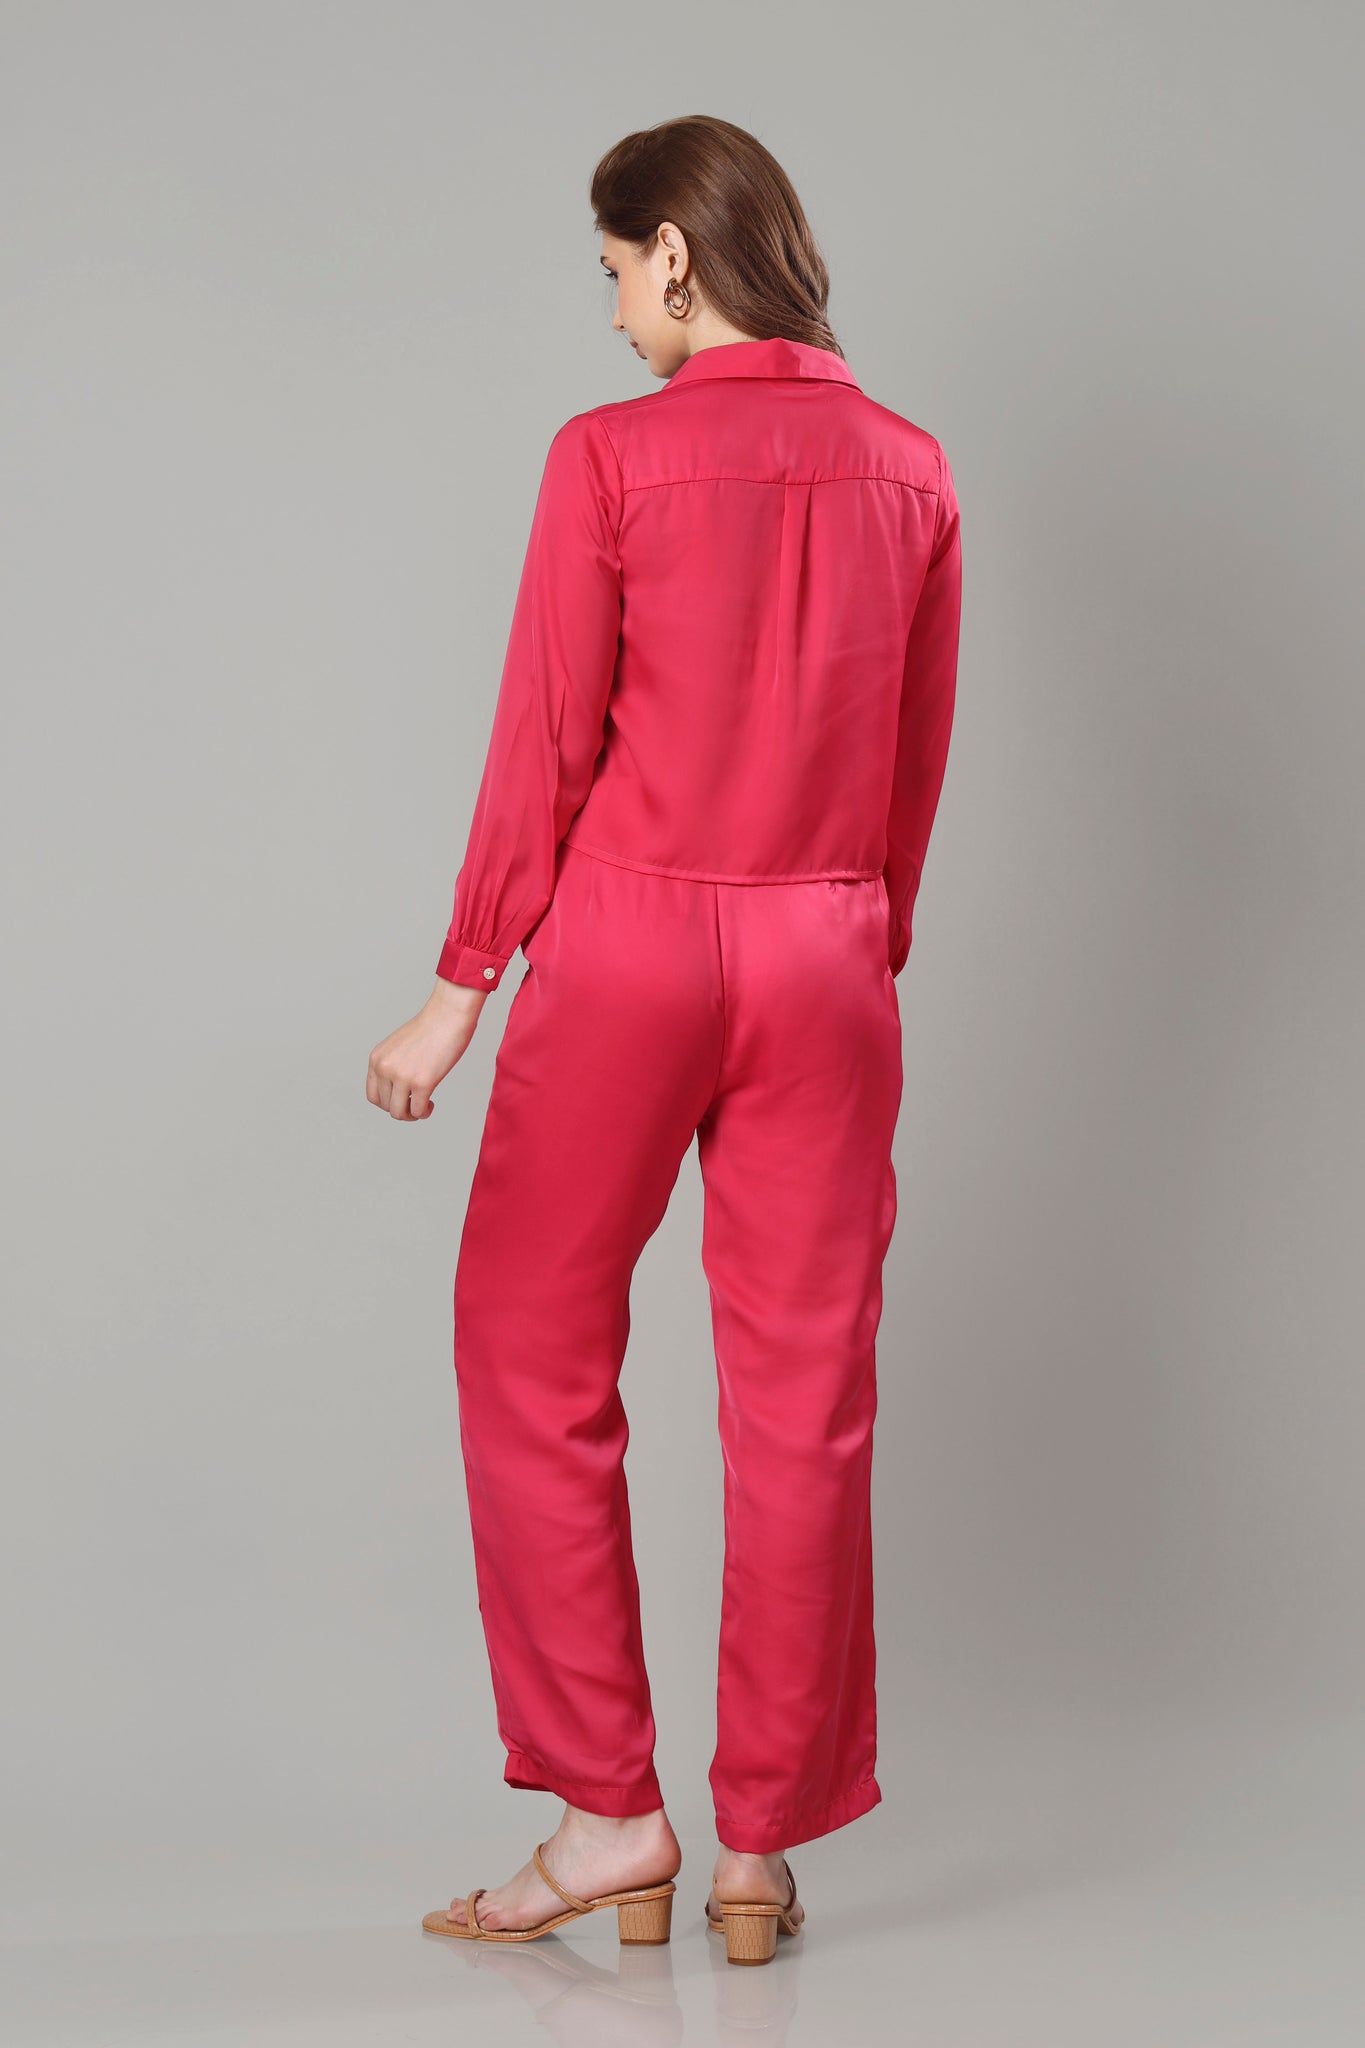 Hot Pink Copeed Shirt Co-Ord Set For Women